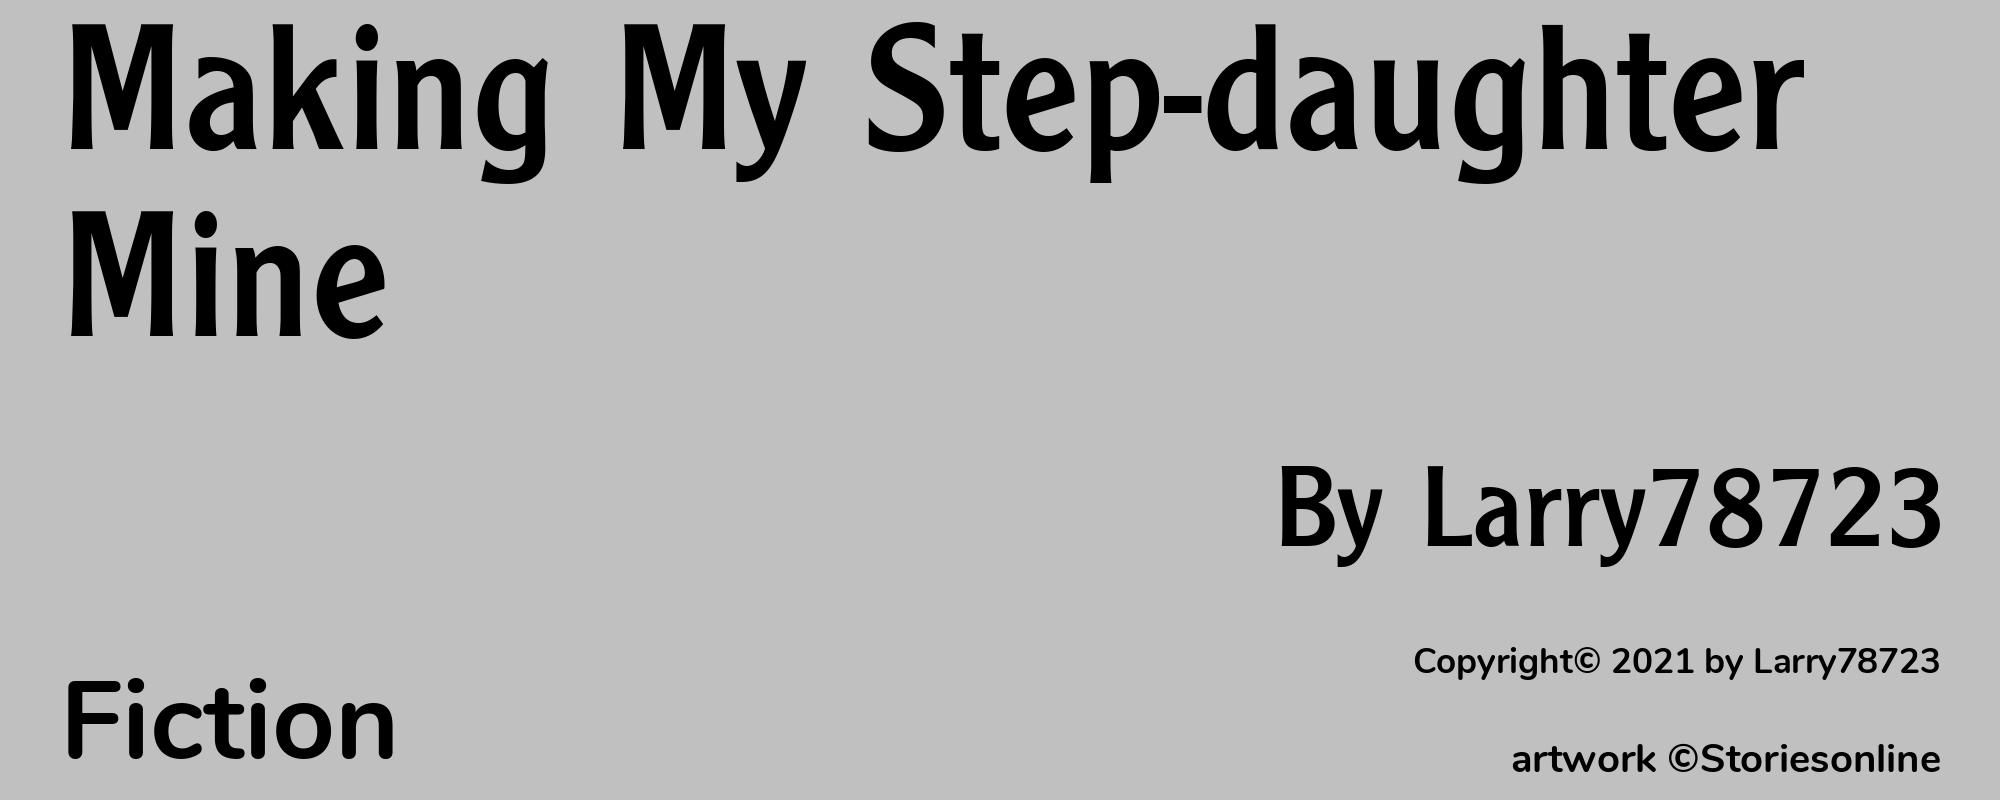 Making My Step-daughter Mine - Cover